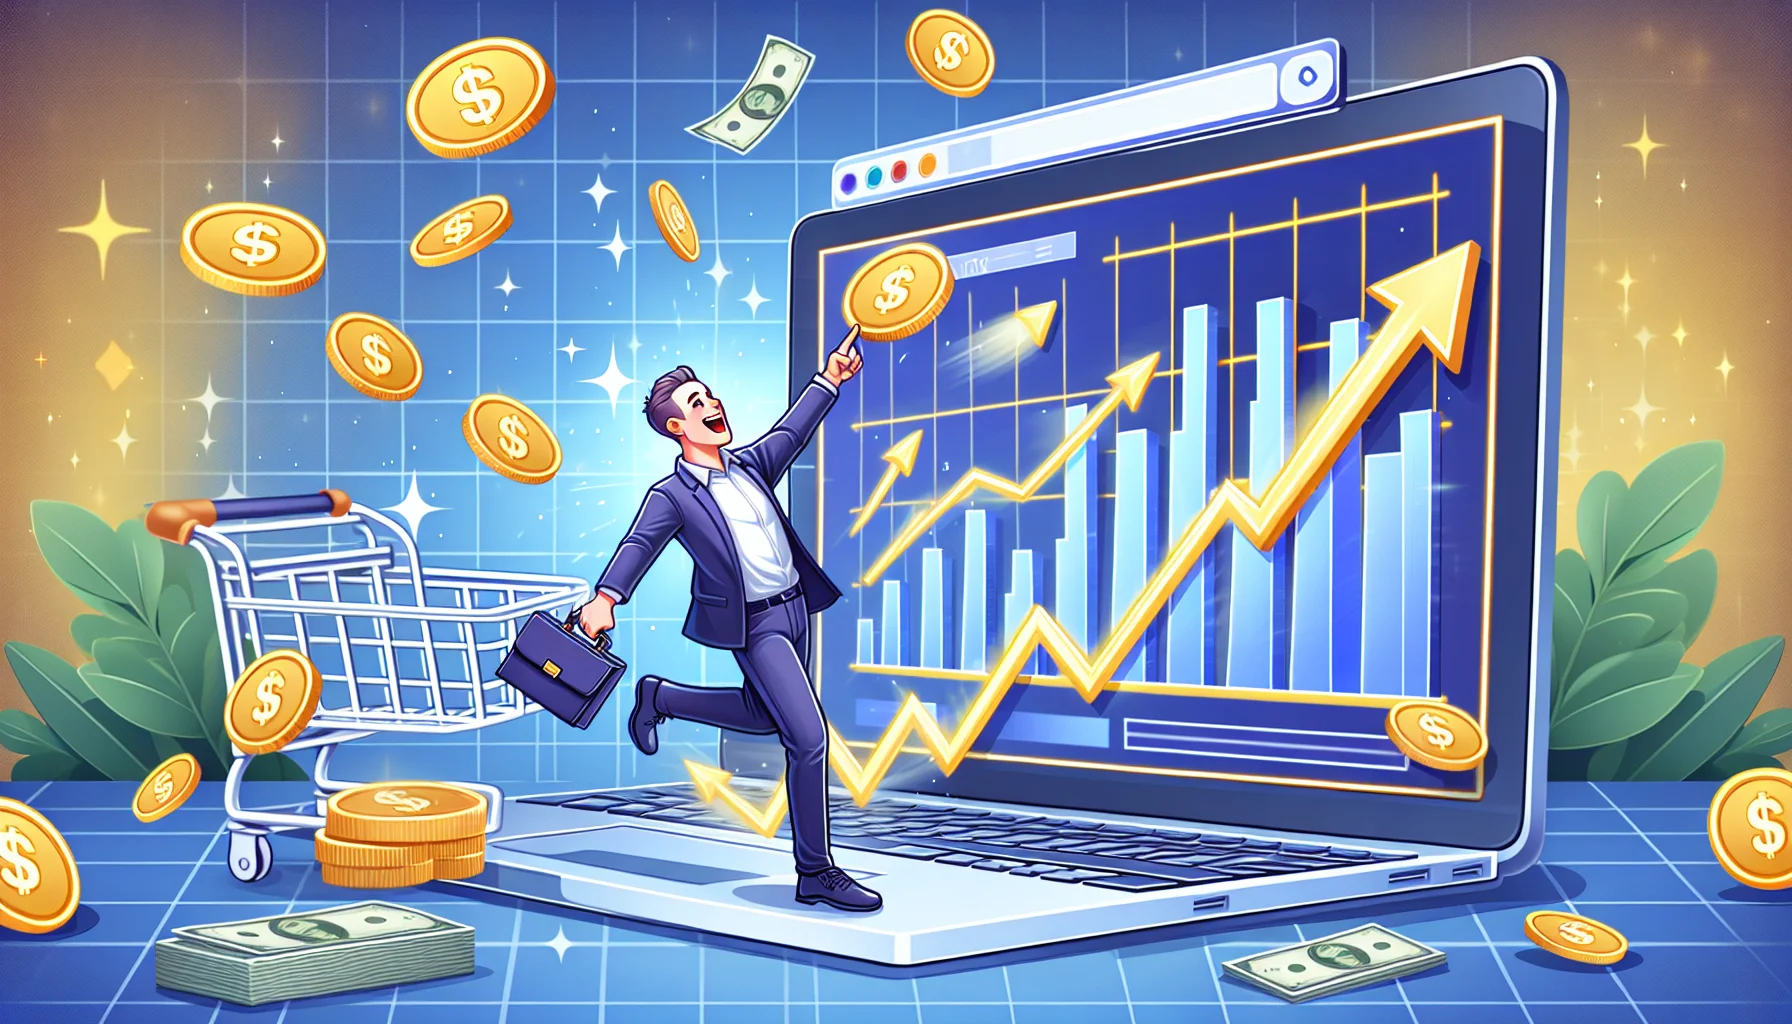 Illustrate an entertaining and realistic image showcasing the concept of affiliate marketing. The primary focus is an online platform frequently associated with e-commerce, which is similar to a well-known worldwide retail corporation. It should be depicted in a lively, money-making scenario. Display a person enthusiastically pointing towards their laptop screen, which shows a rising graph indicating success. Include dollar bills floating around to signify the prosperous nature of online business. Make sure the environment is vivid and sparks motivation for viewers.